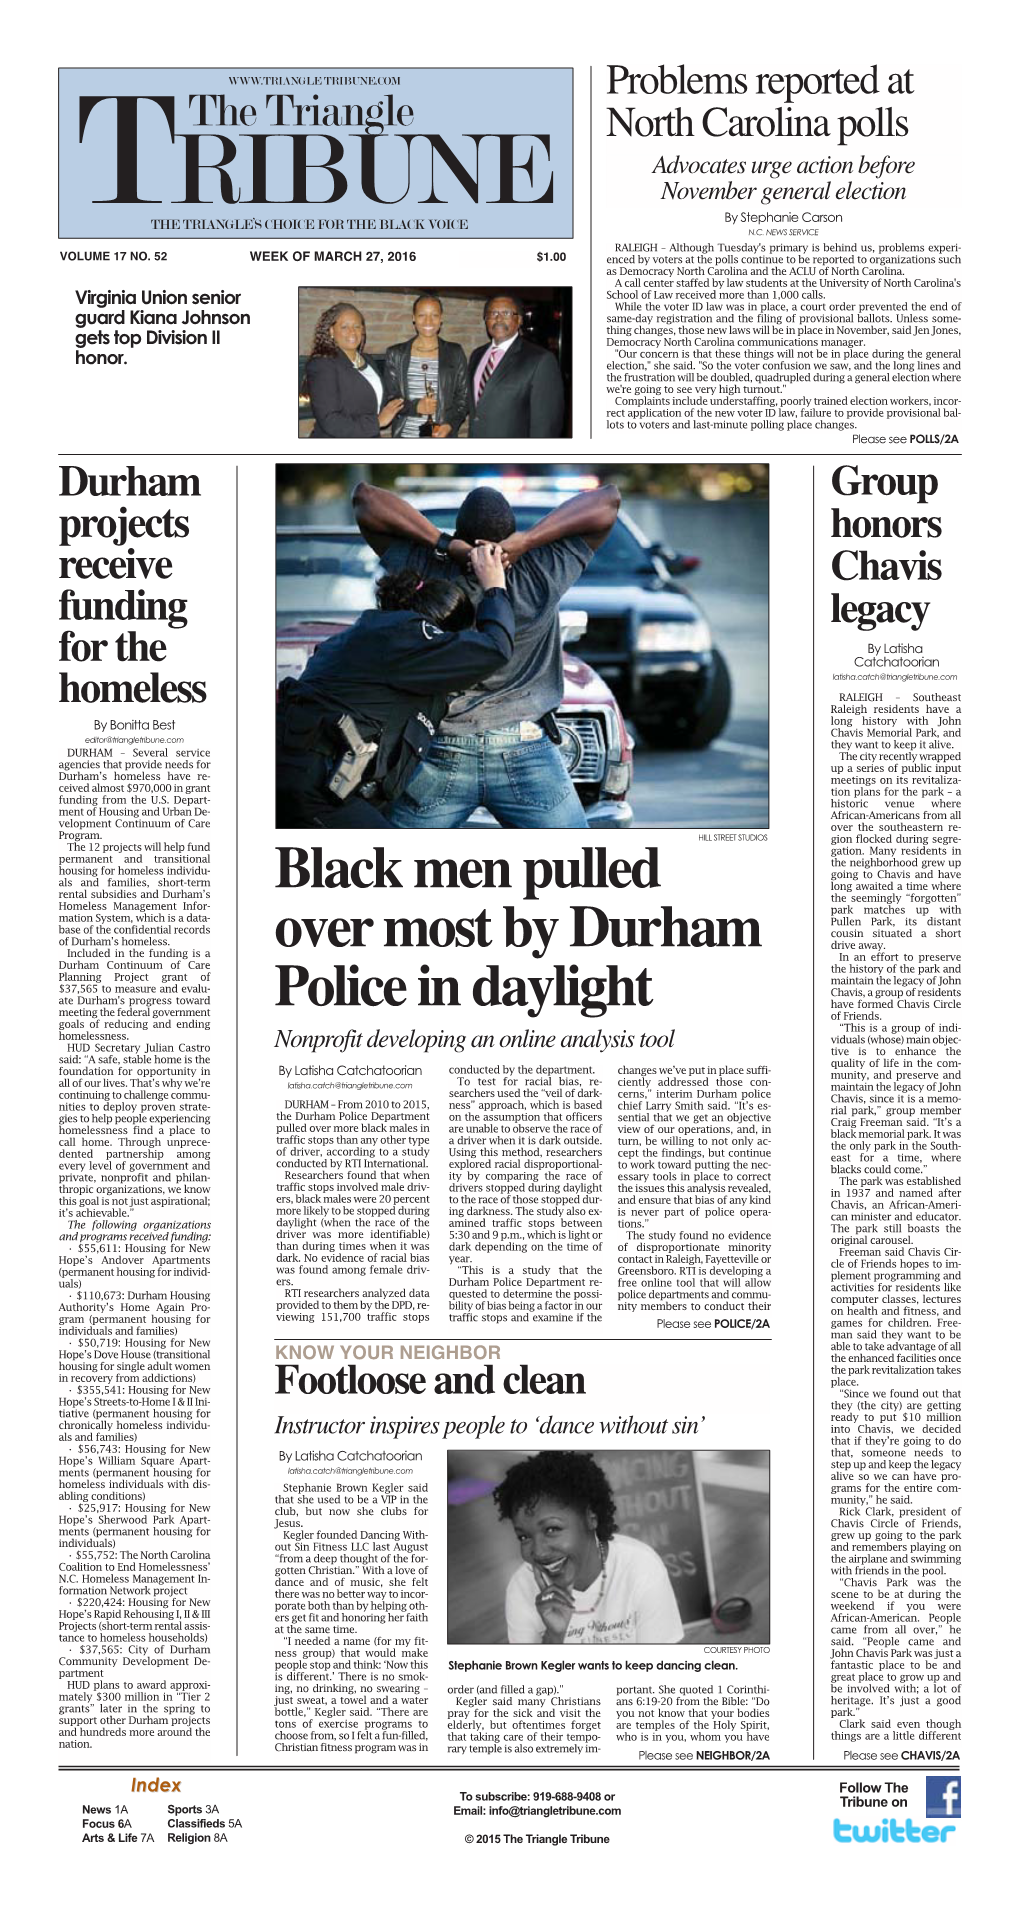 Black Men Pulled Over Most by Durham Police in Daylight